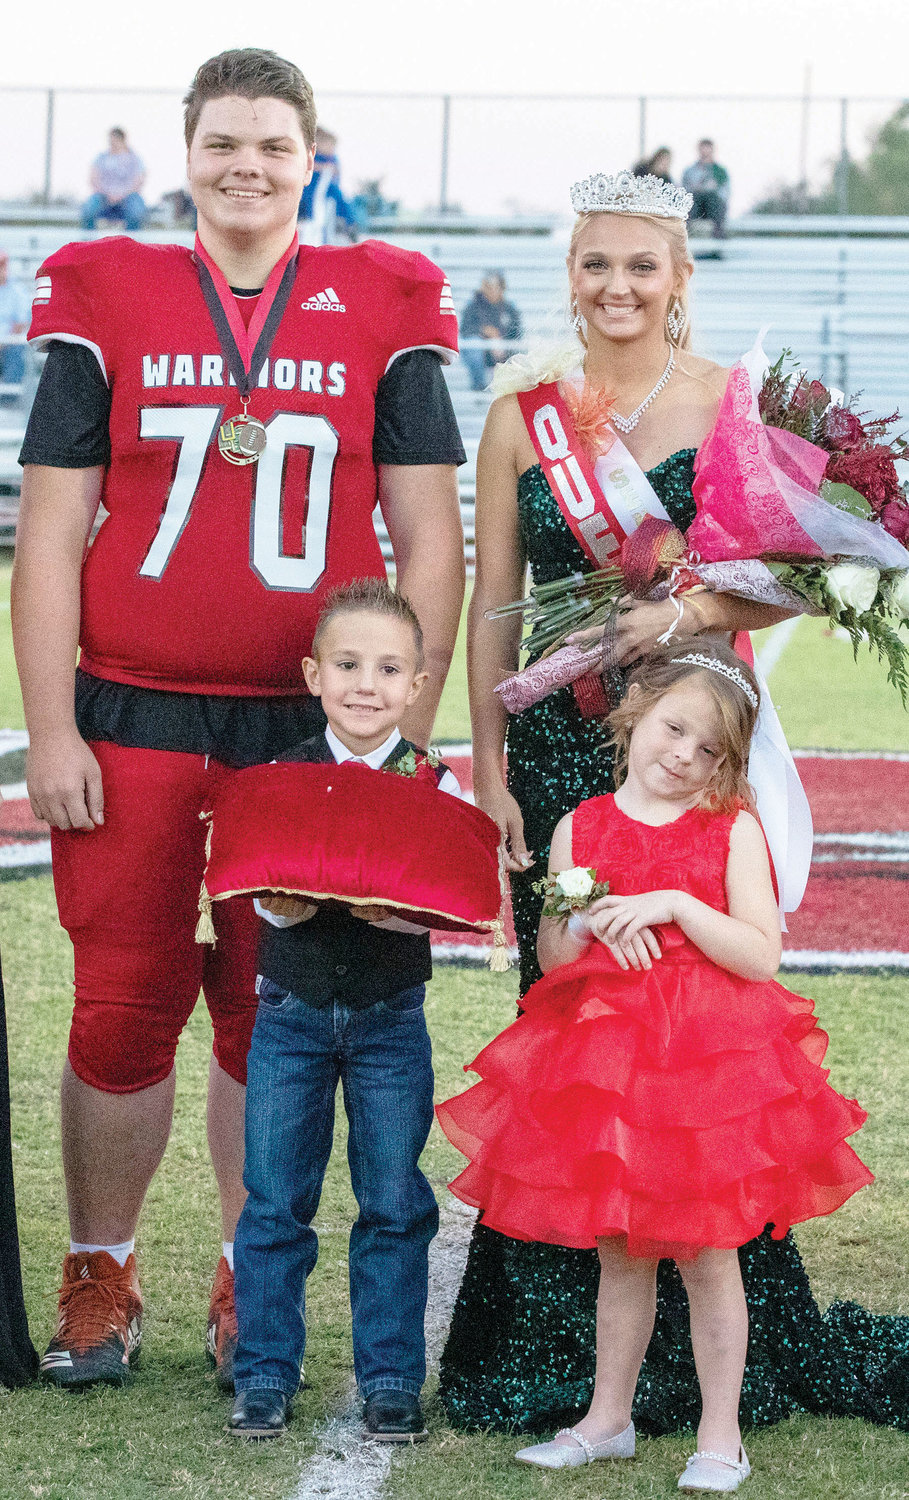 Dom Jackson was named king and Mattie Richardson was crowned queen during Washington’s homecoming ceremonies Friday. The flower girl was Ripkyn Lampkin and the crown bearer was Sawyer Scott.